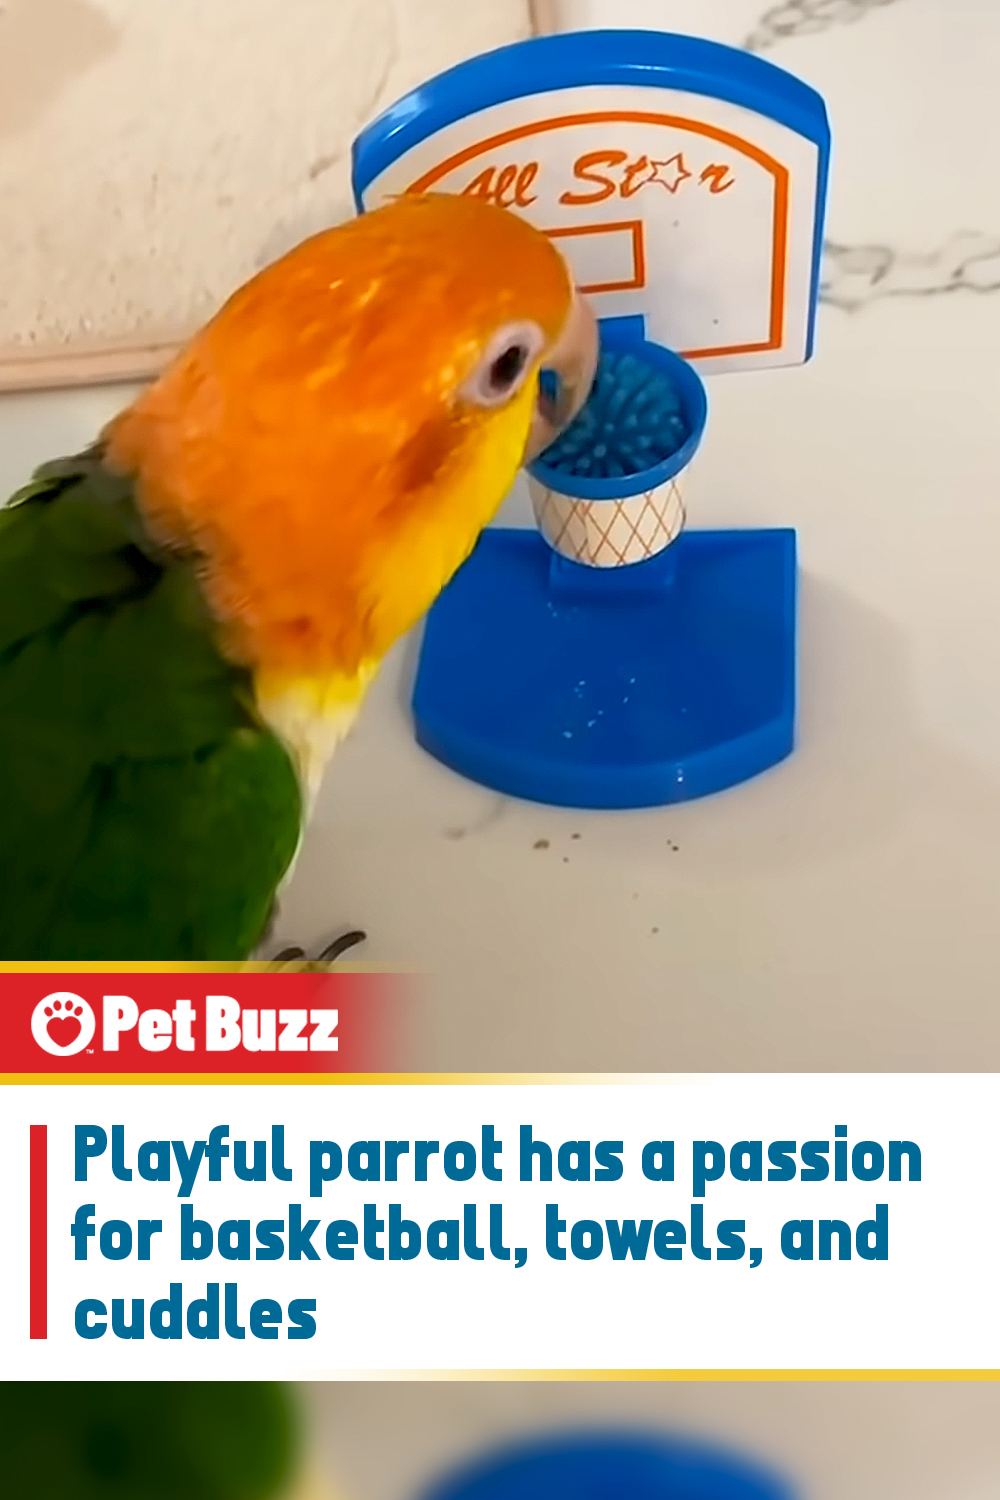 Playful parrot has a passion for basketball, towels, and cuddles